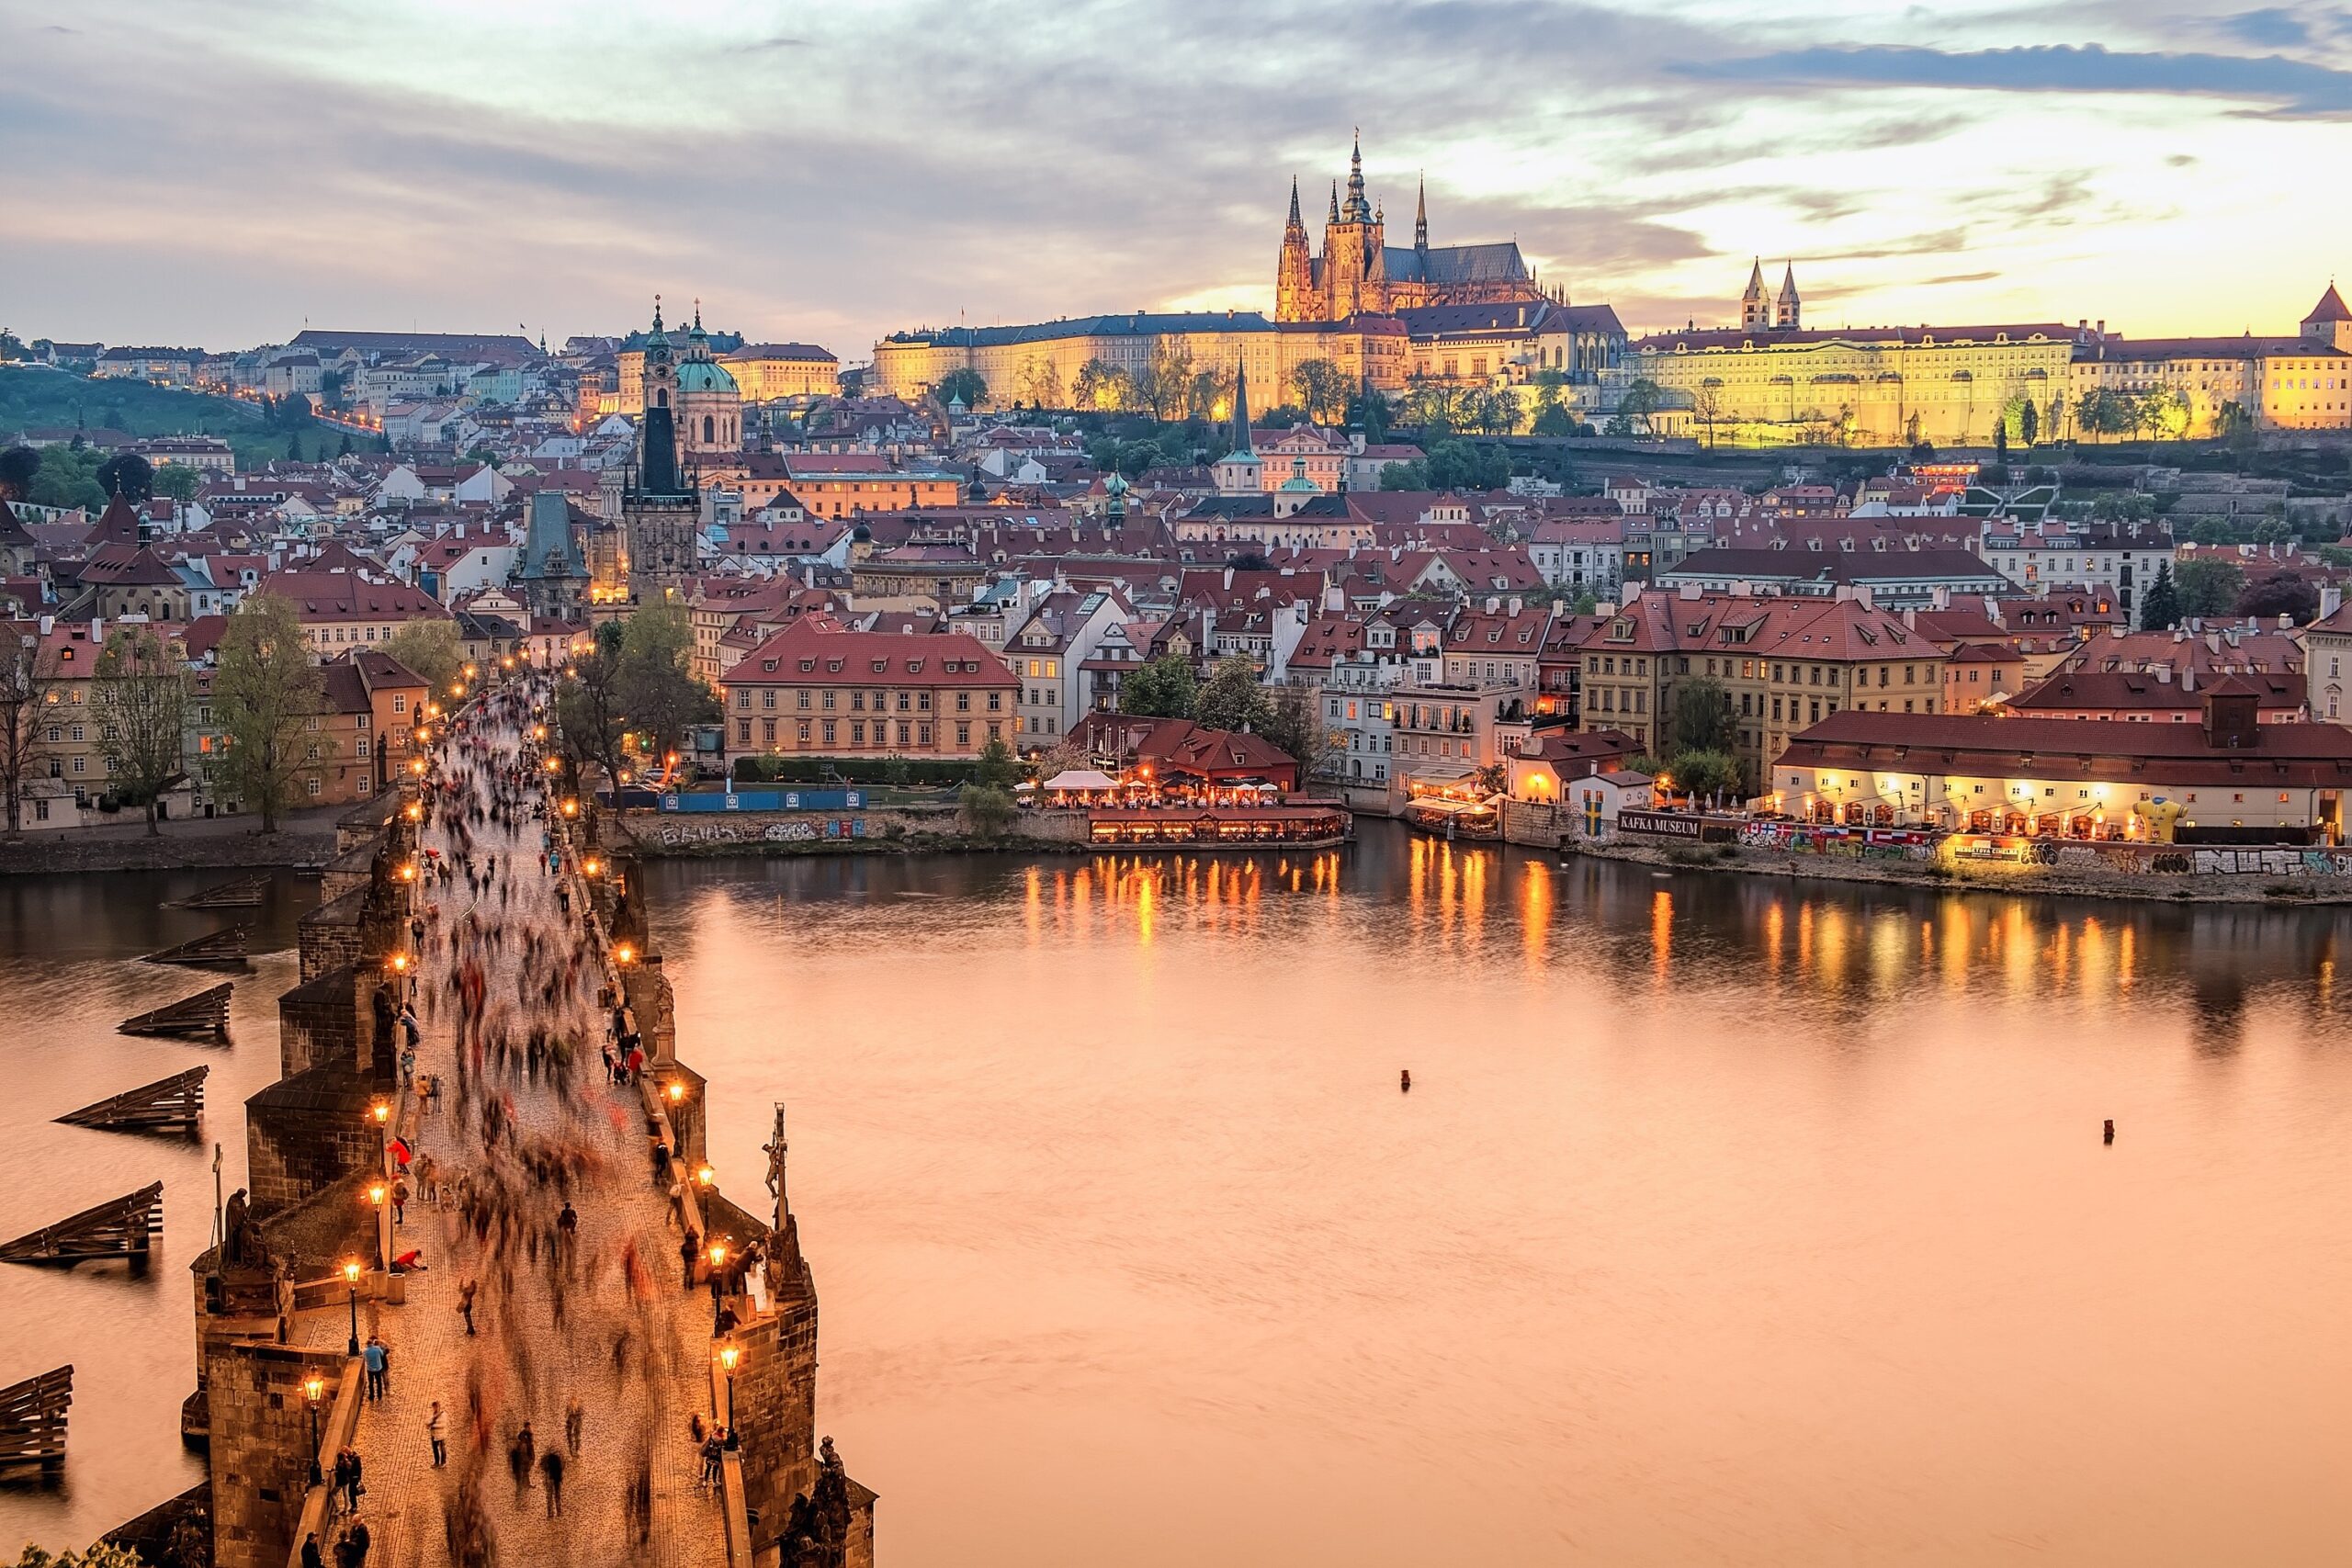 The real estate market in Prague: trends and future prospects